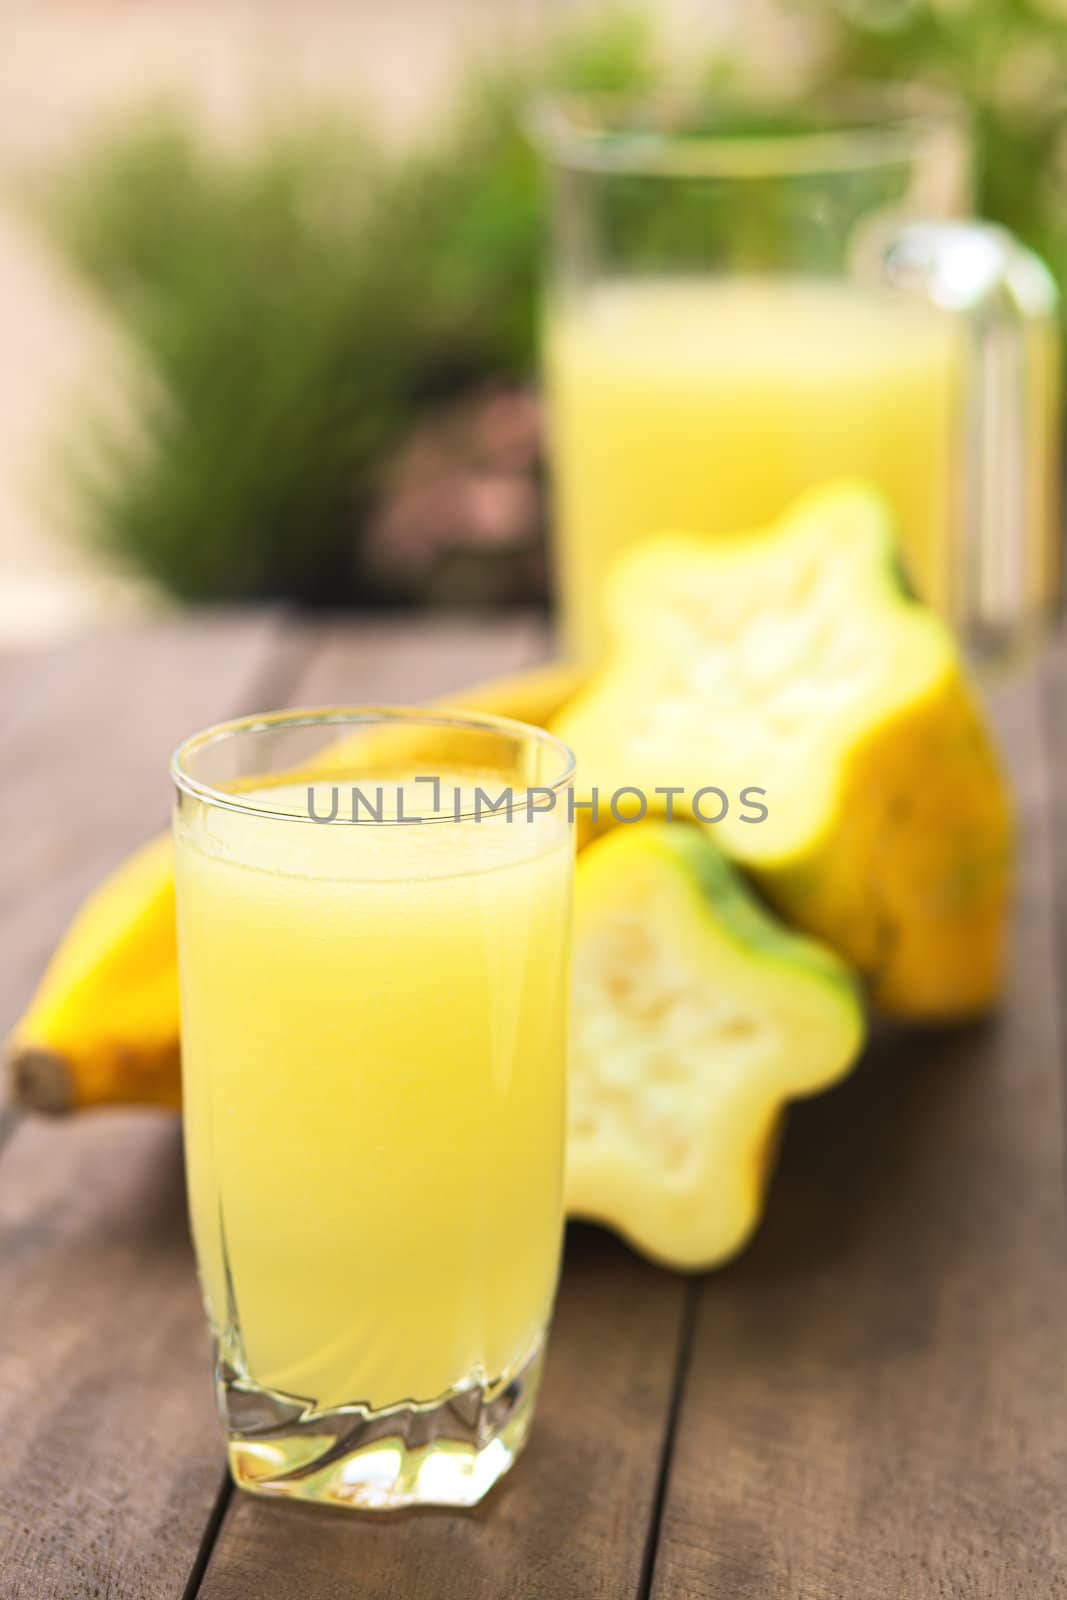 Freshly prepared juice out of the Ecuadorian Babaco fruit (lat. Vasconcellea x heilbornii; syn. Carica pentagona) (Selective Focus, Focus on the front rim of the glass)